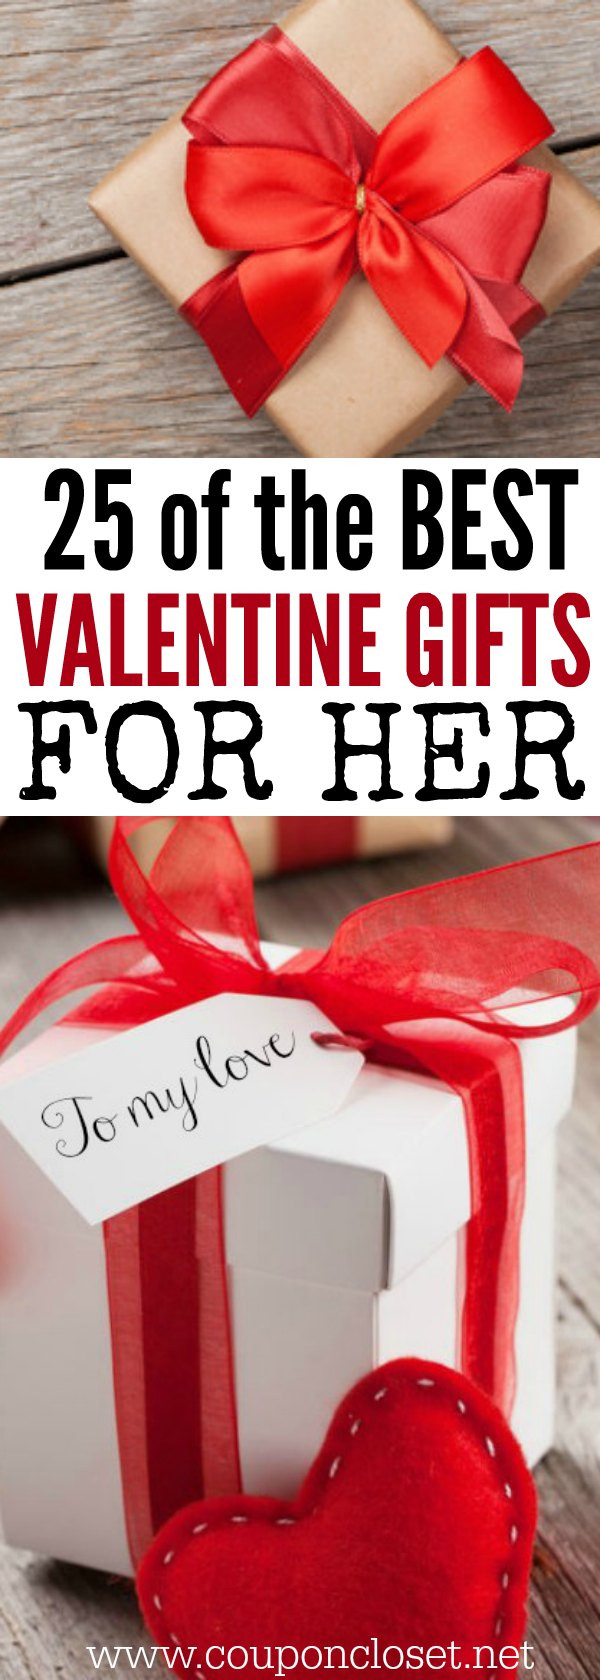 Gift Ideas For Her On Valentine'S Day
 25 Valentine s Day ts for Her on a bud  e Crazy Mom